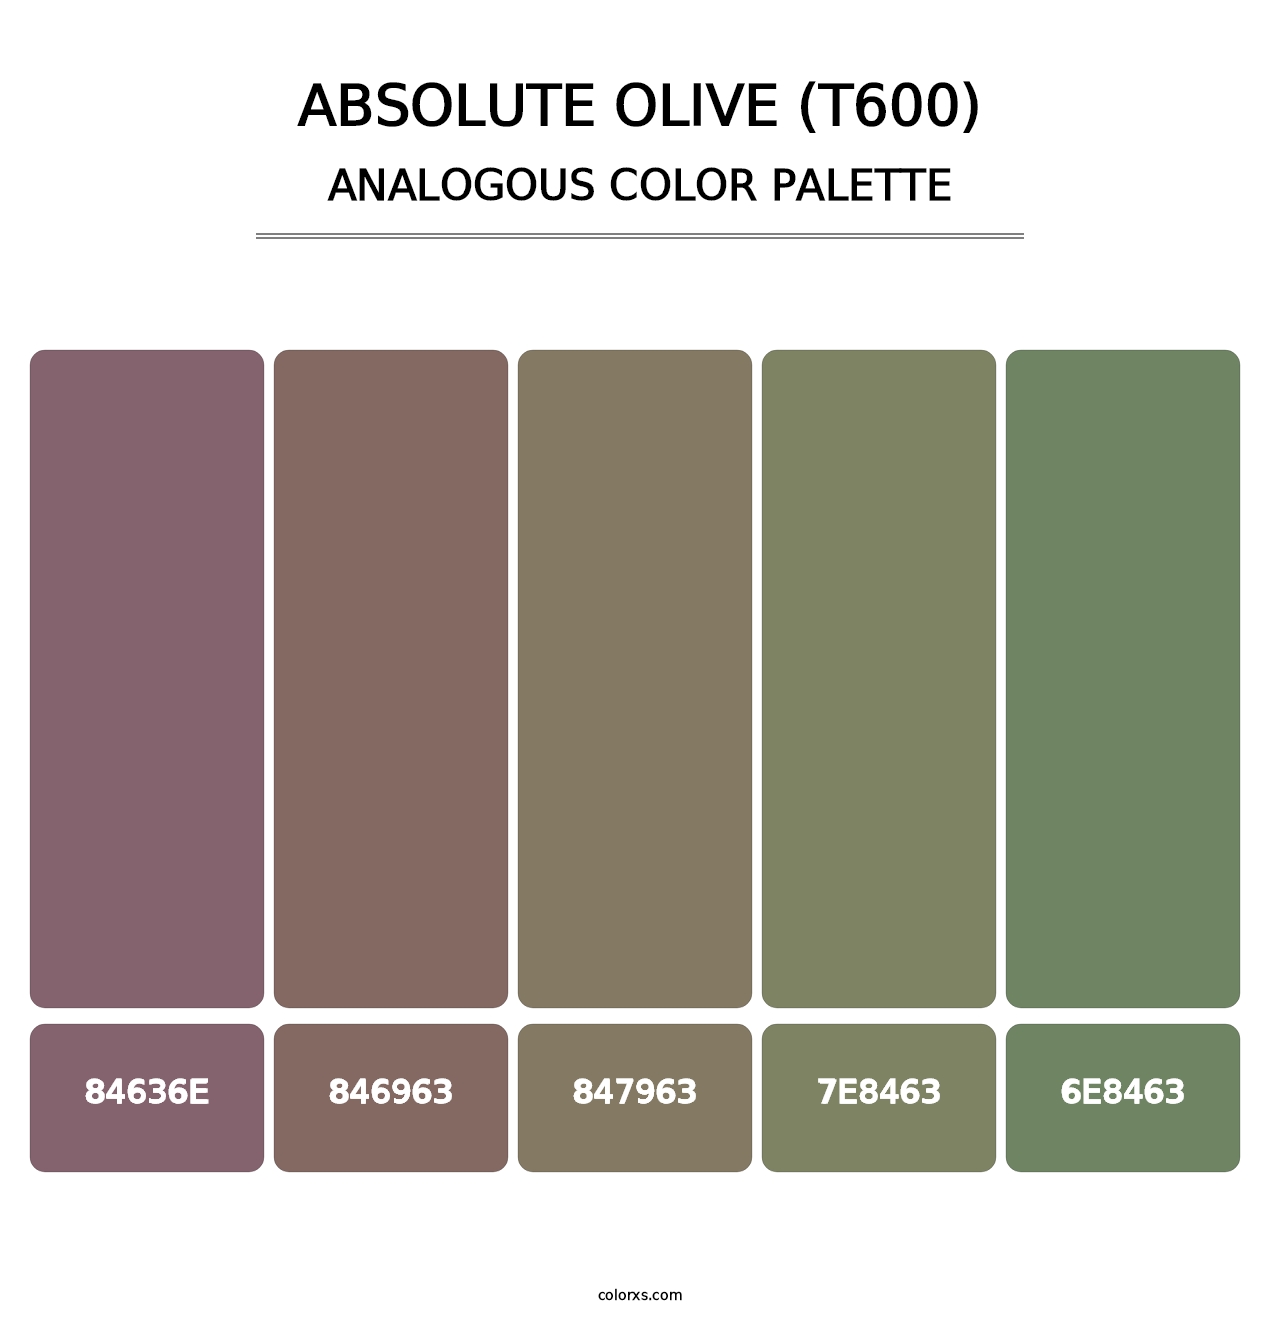 Absolute Olive (T600) - Analogous Color Palette